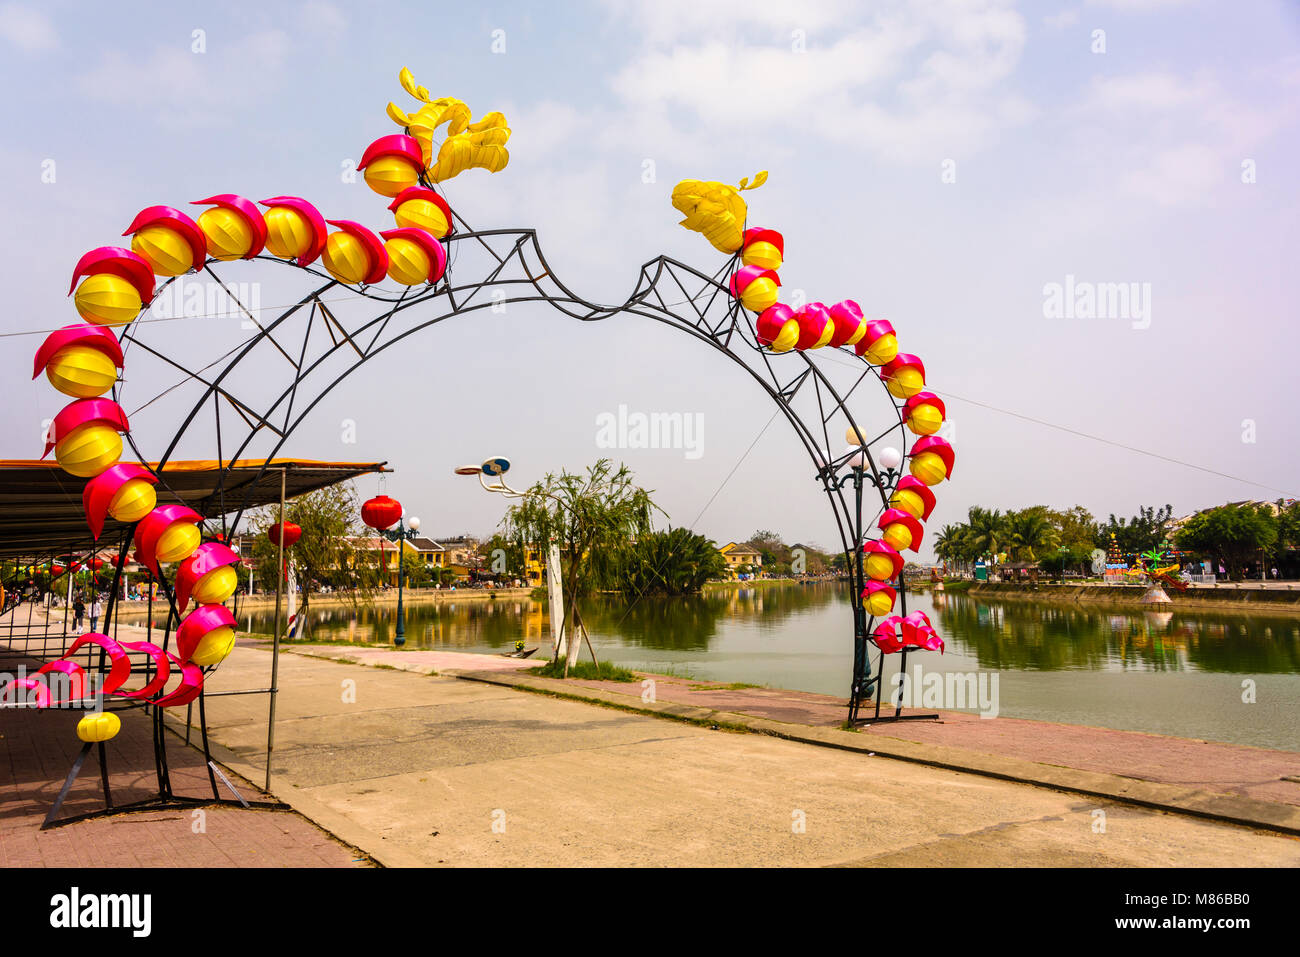 Red and yellow dragons on an archway to celebrate the Chinese Lunar New Year in Hoi An, Vietnam Stock Photo